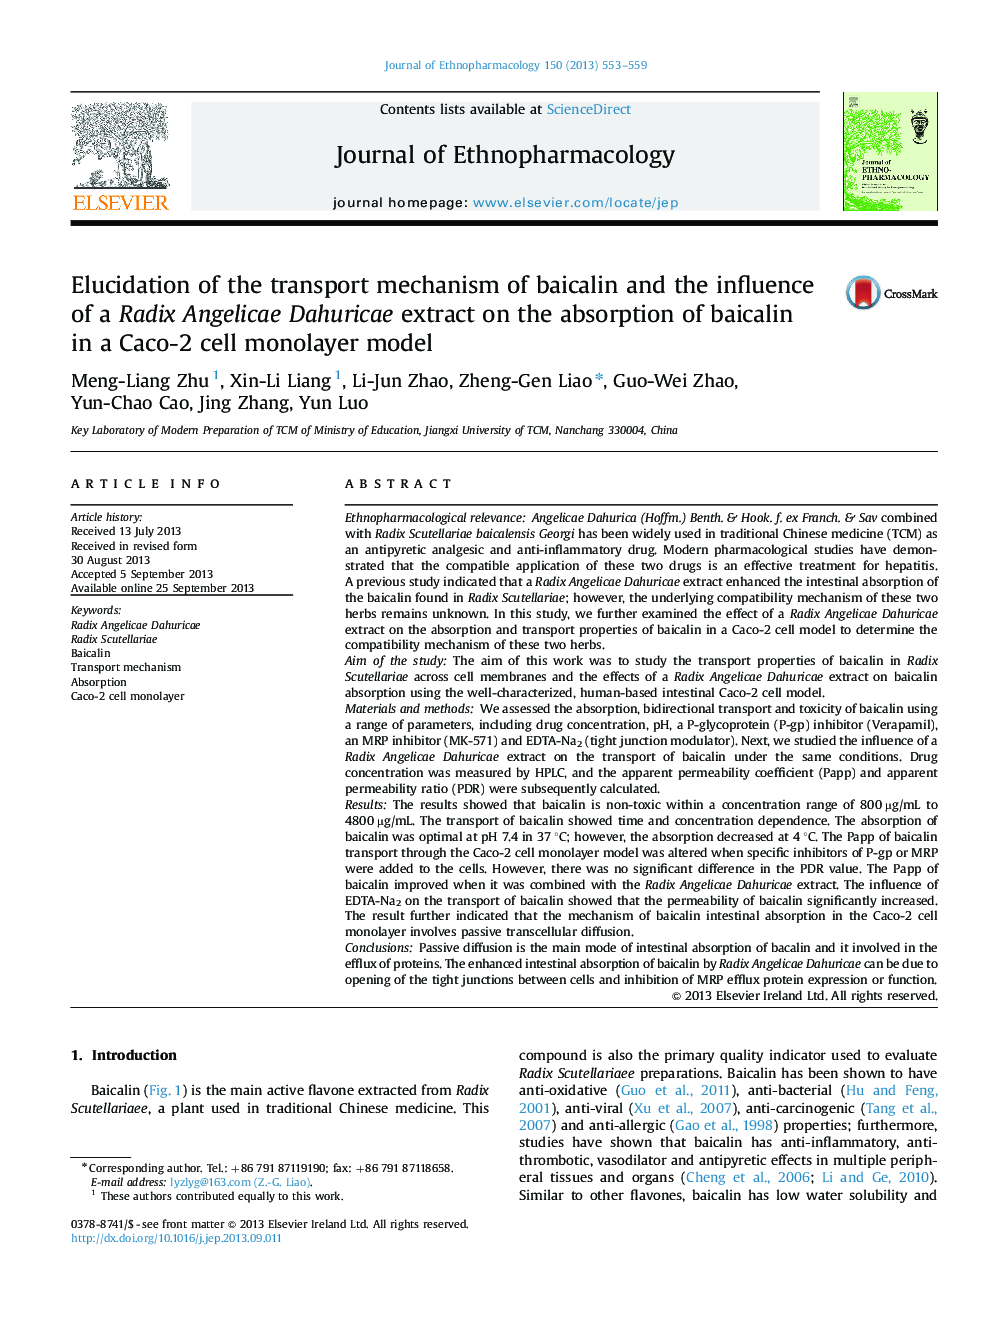 Elucidation of the transport mechanism of baicalin and the influence of a Radix Angelicae Dahuricae extract on the absorption of baicalin in a Caco-2 cell monolayer model